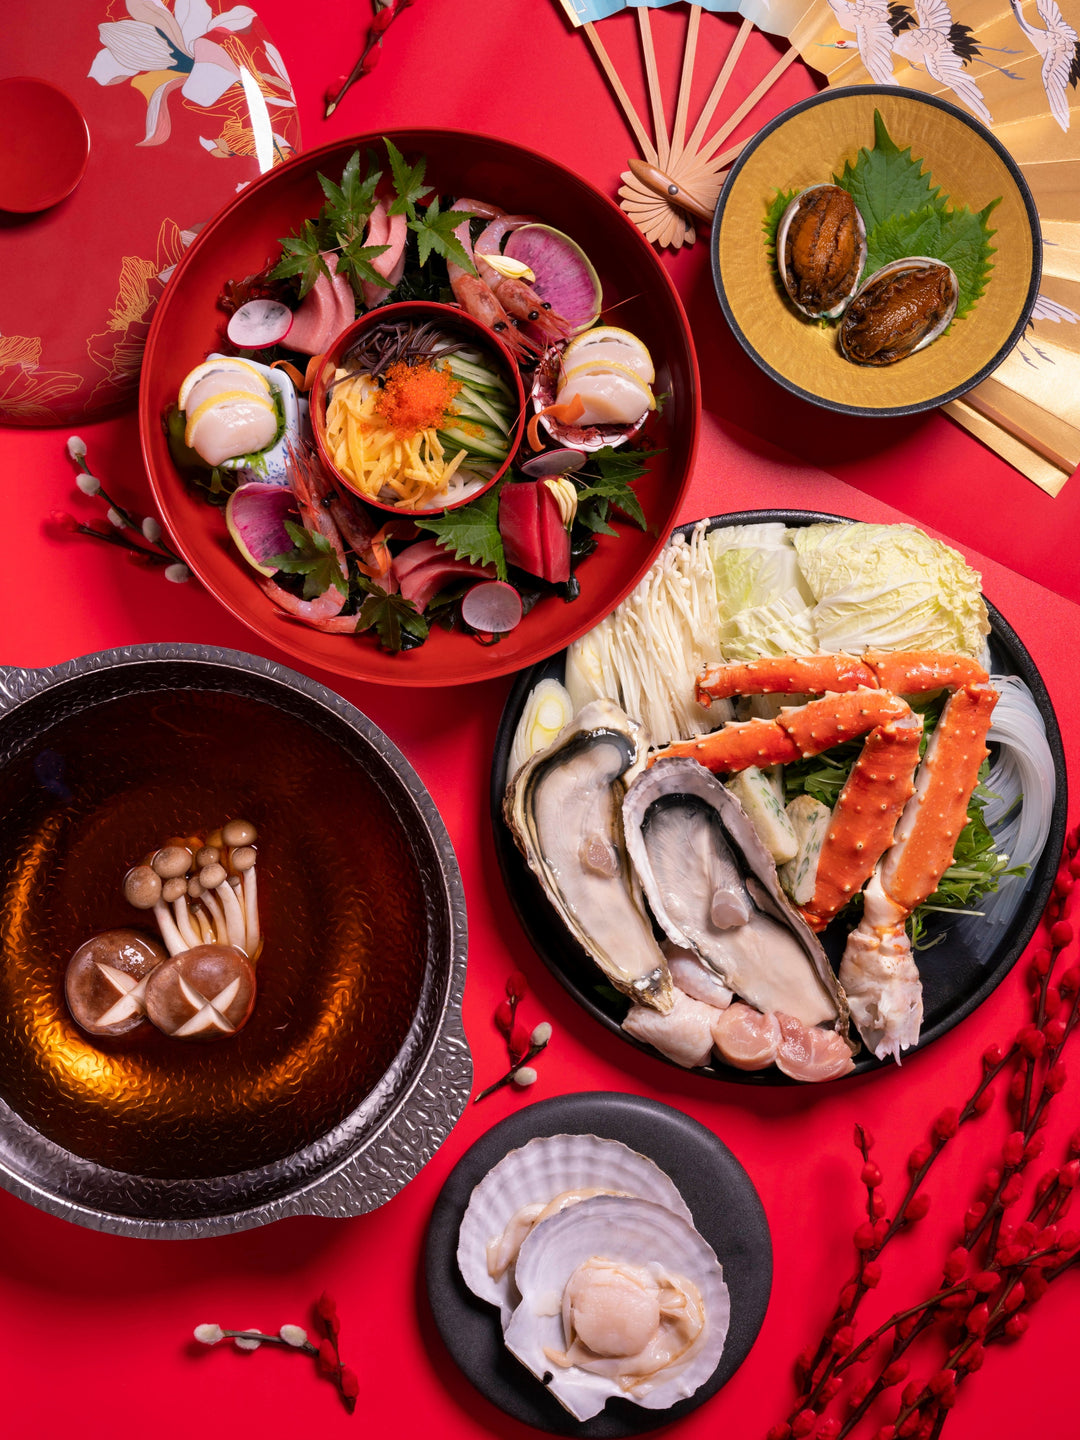 FUMI CNY Special: ALL-YOU-CAN-EAT DINNER (10% OFF) [DEPOSIT]